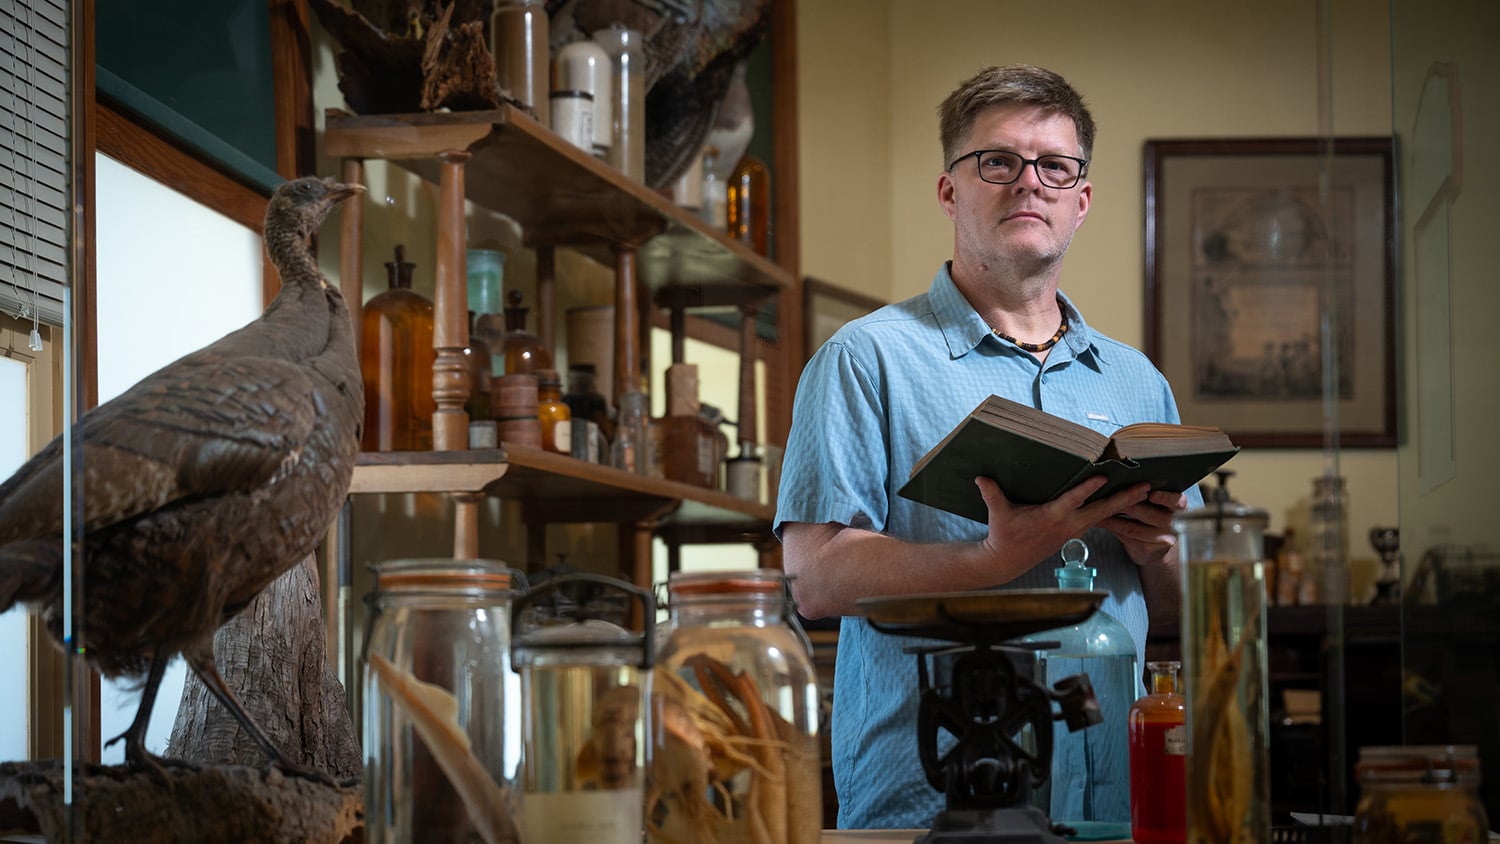 Historian of science Paul Brinkman holds a book in a glass-walled exhibit at the North Carolina Museum of Natural Sciences